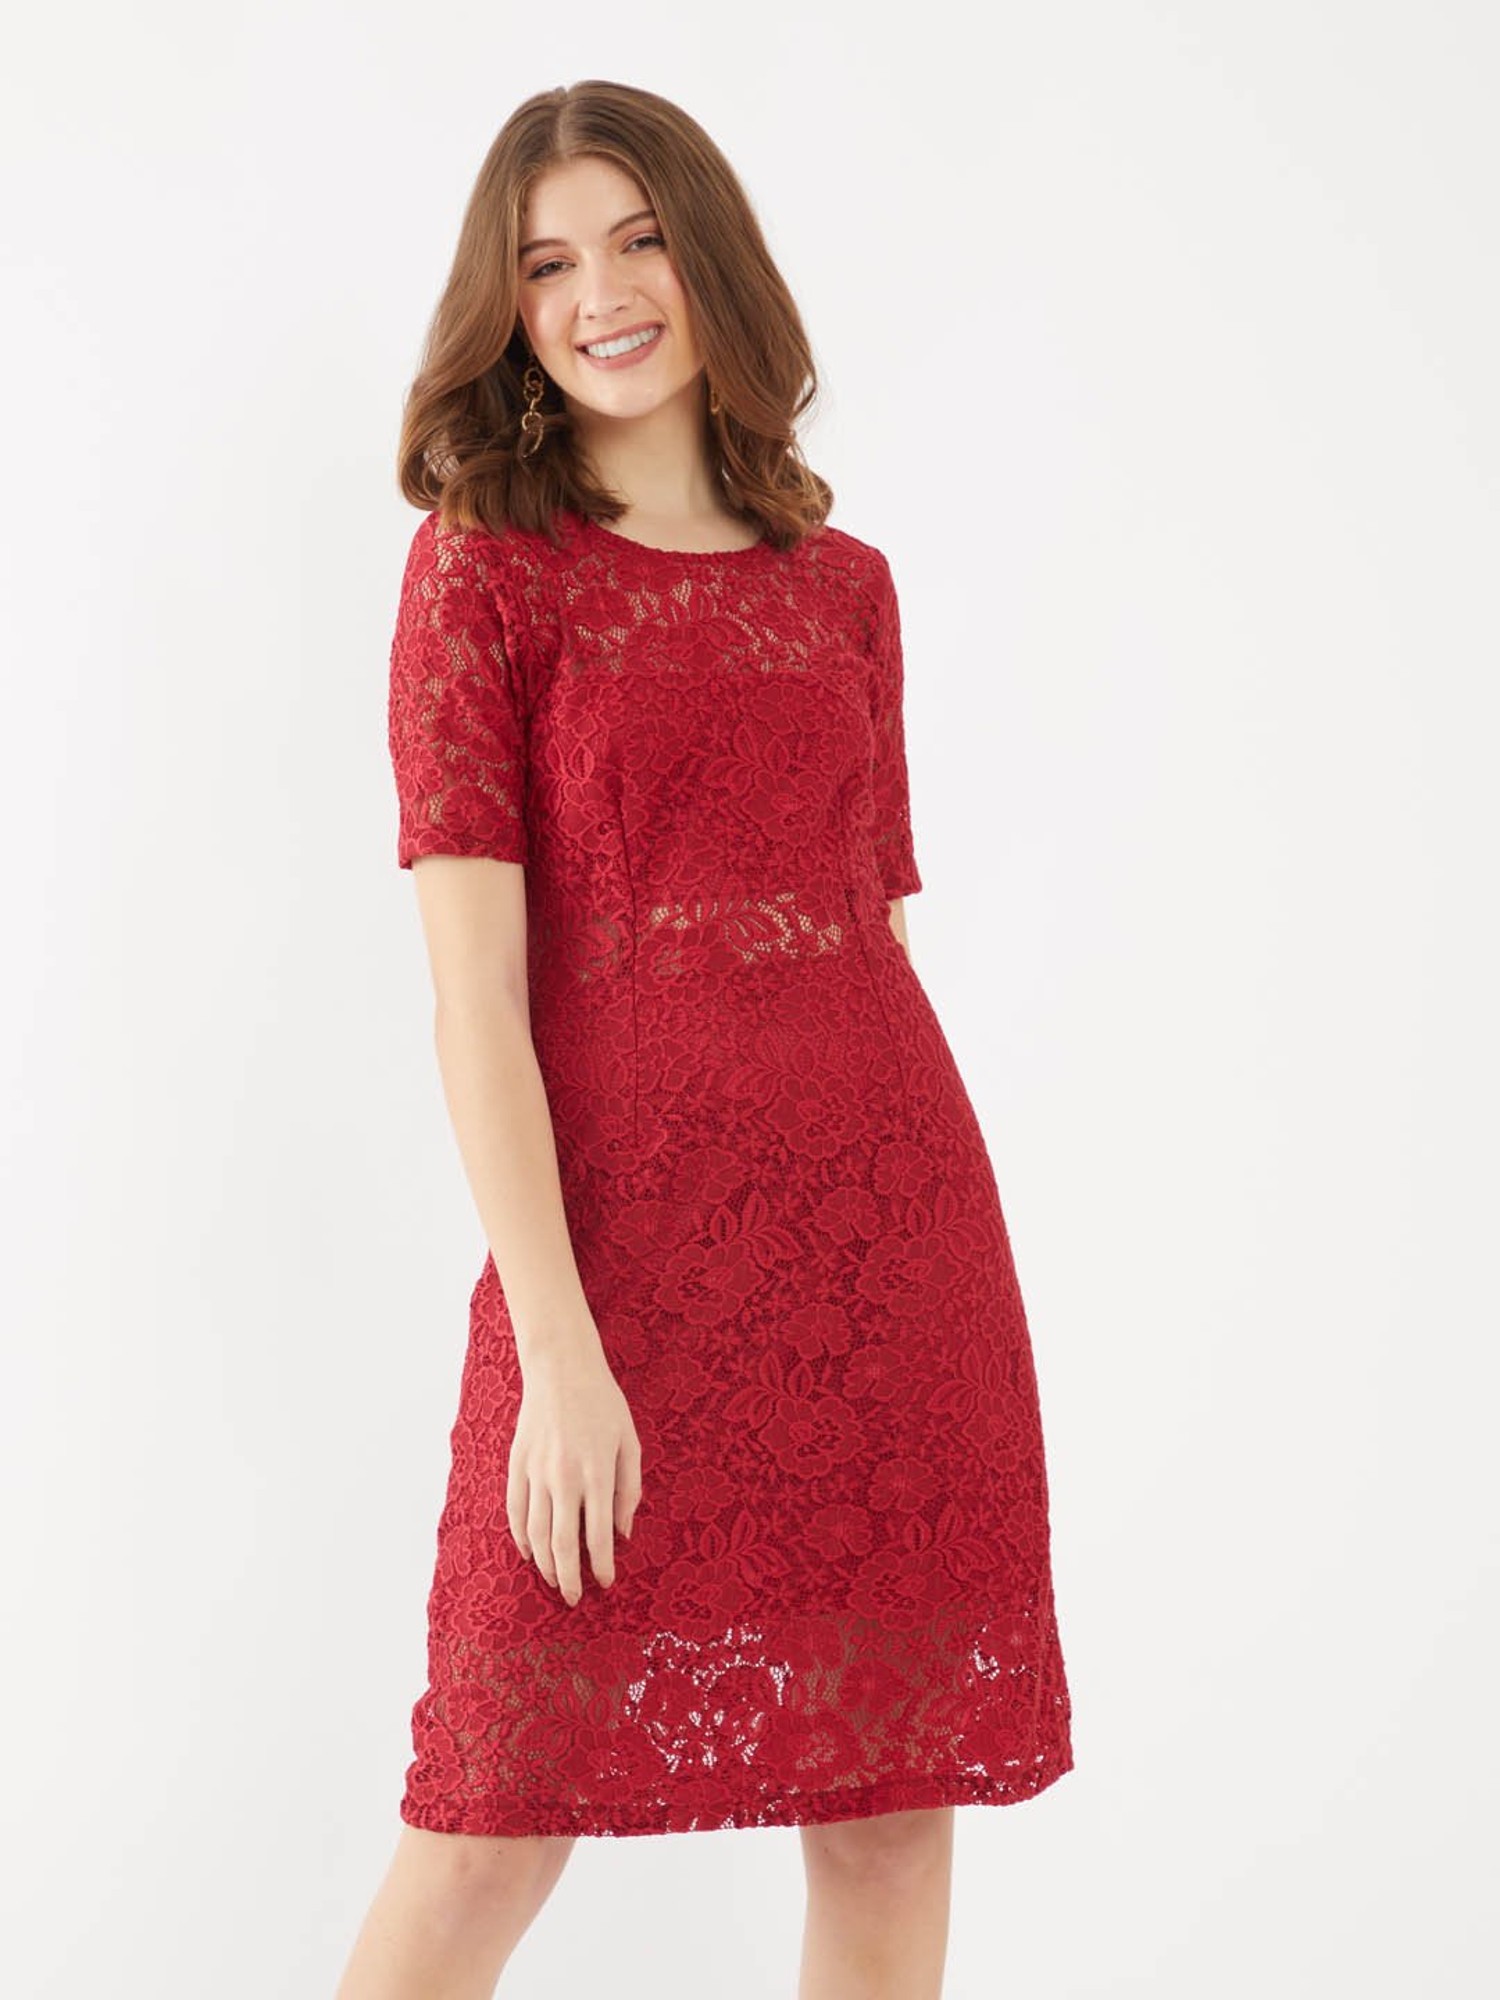 Buy Zink London Maroon Lace Dress for ...